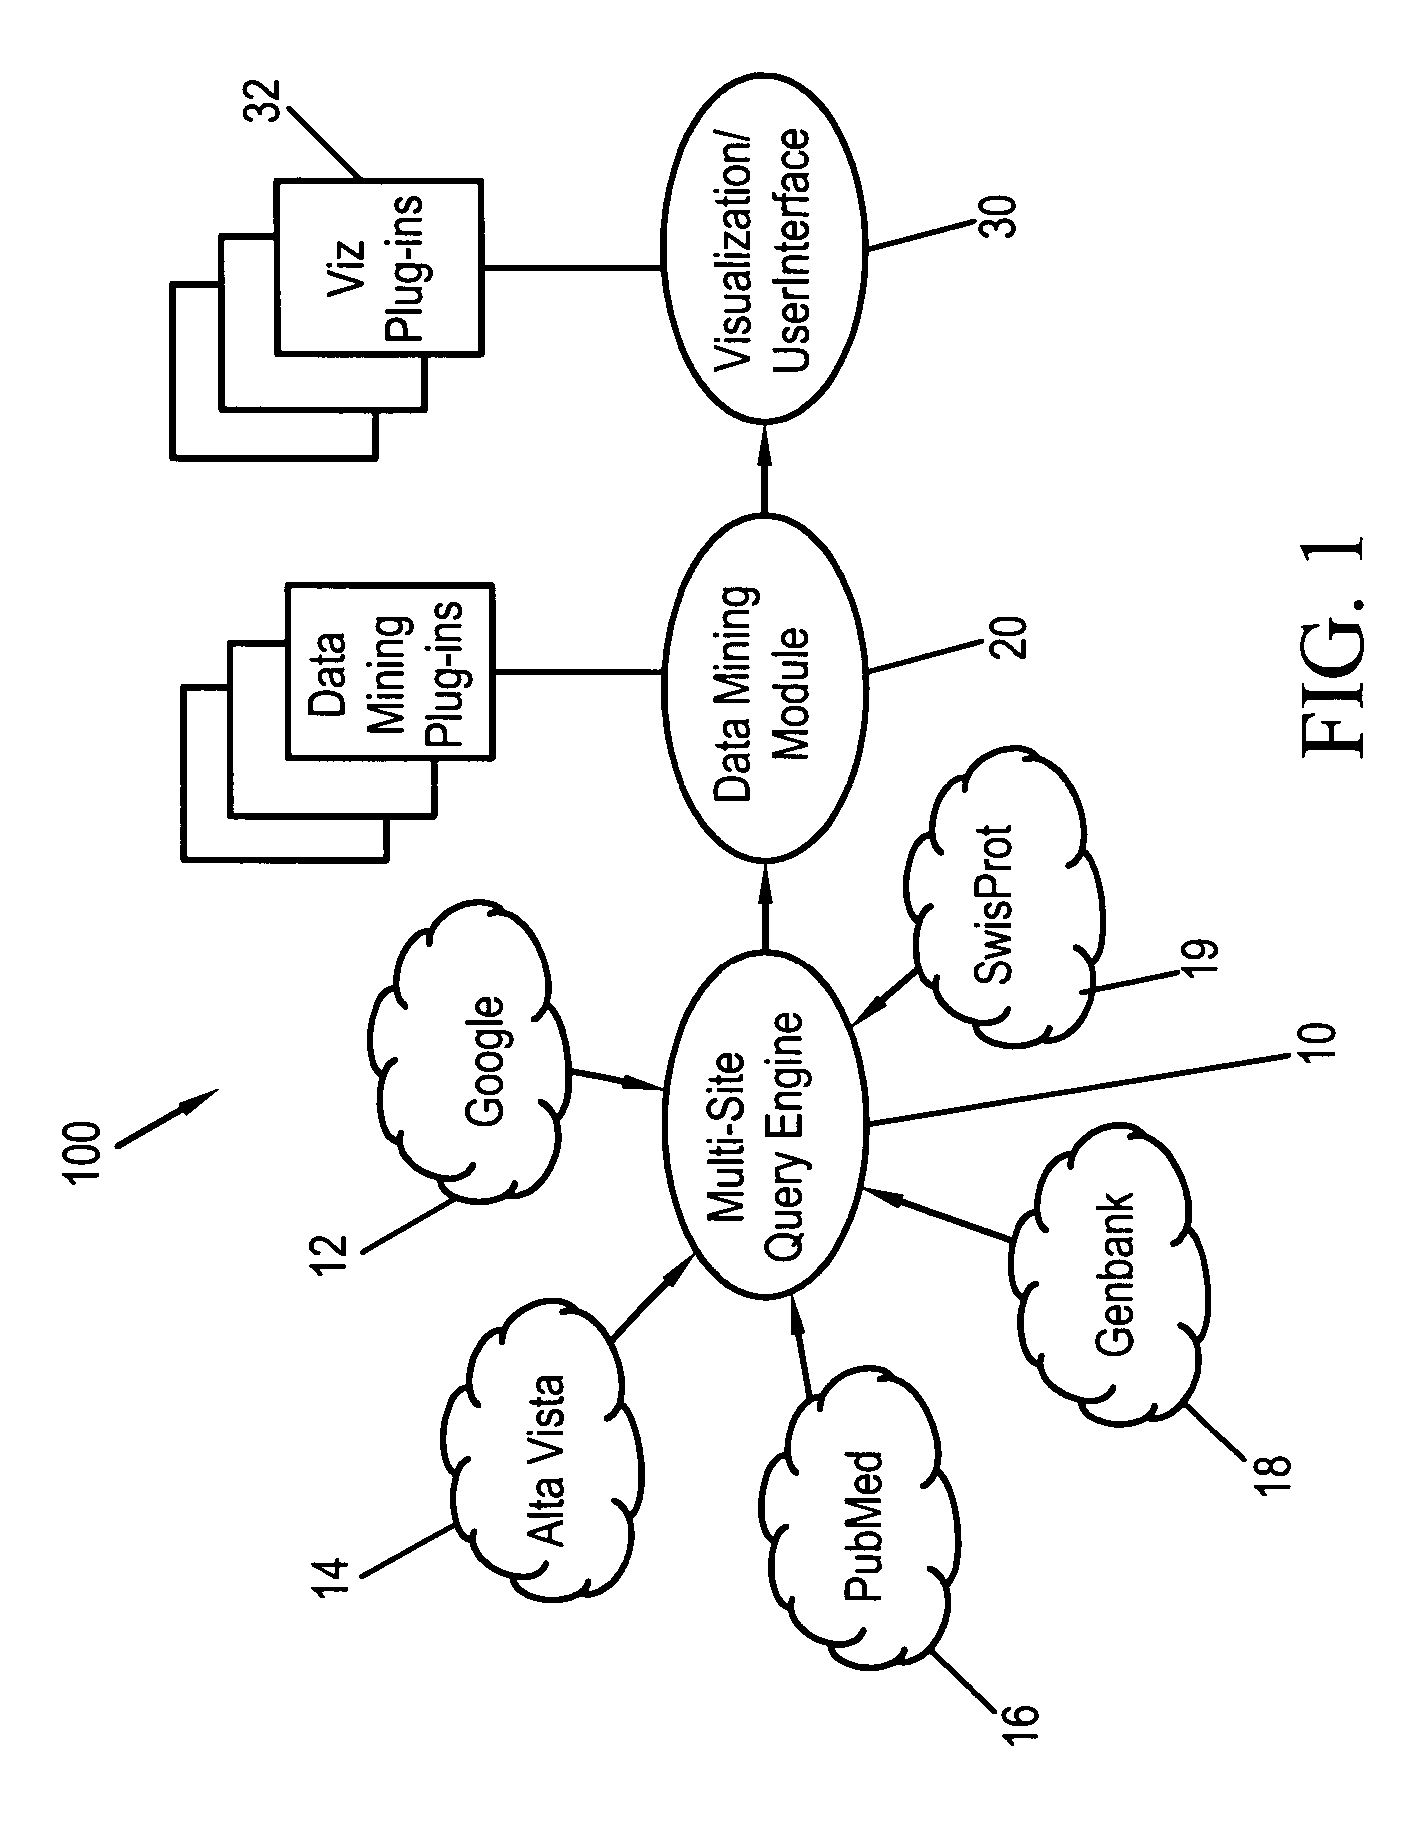 Systems, methods and computer readable media for performing a domain-specific metasearch, and visualizing search results therefrom